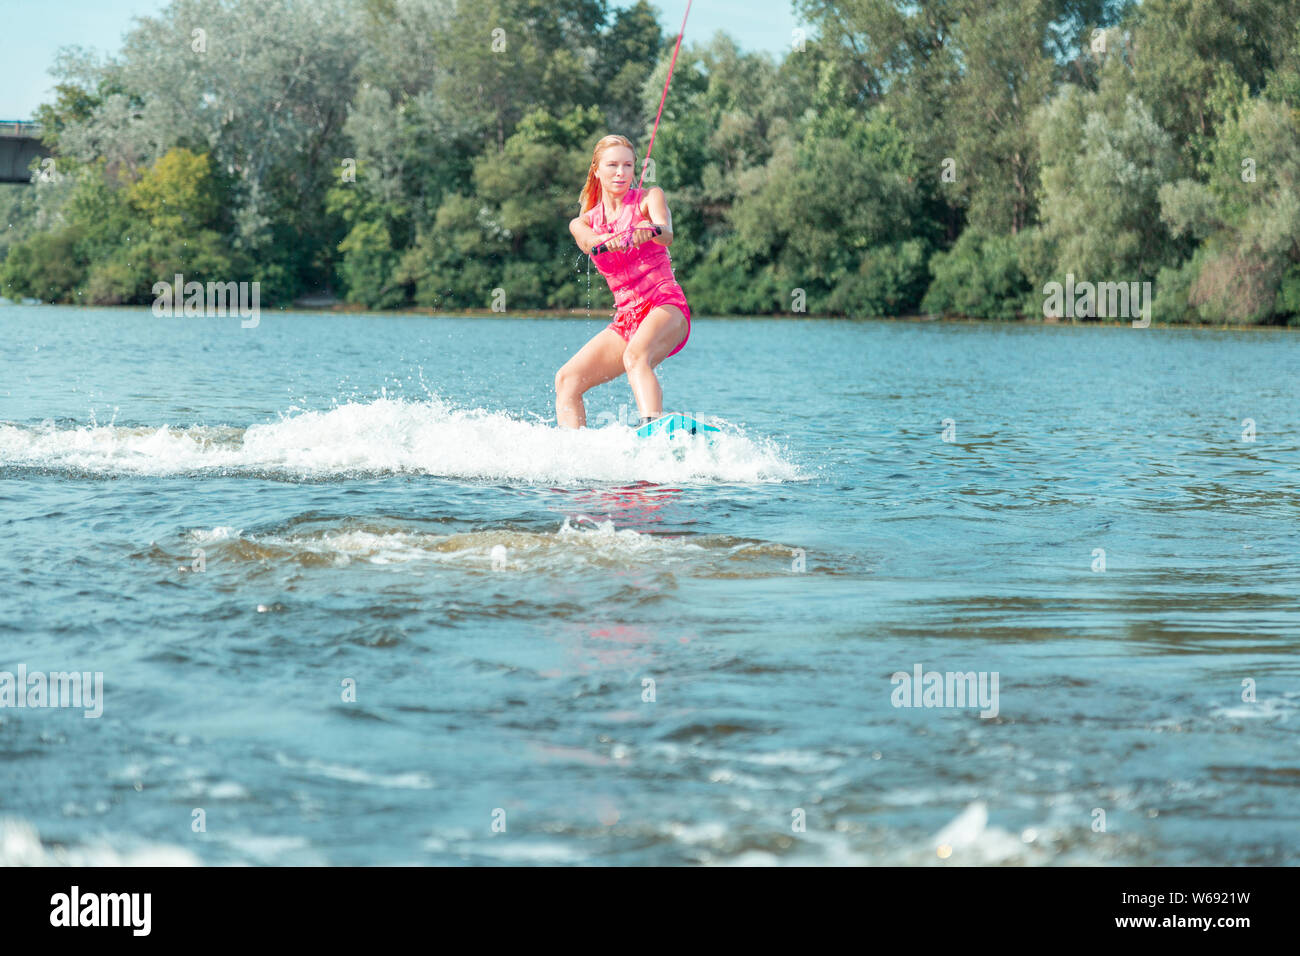 Young active beautiful blonde woman riding a wakeboard Stock Photo